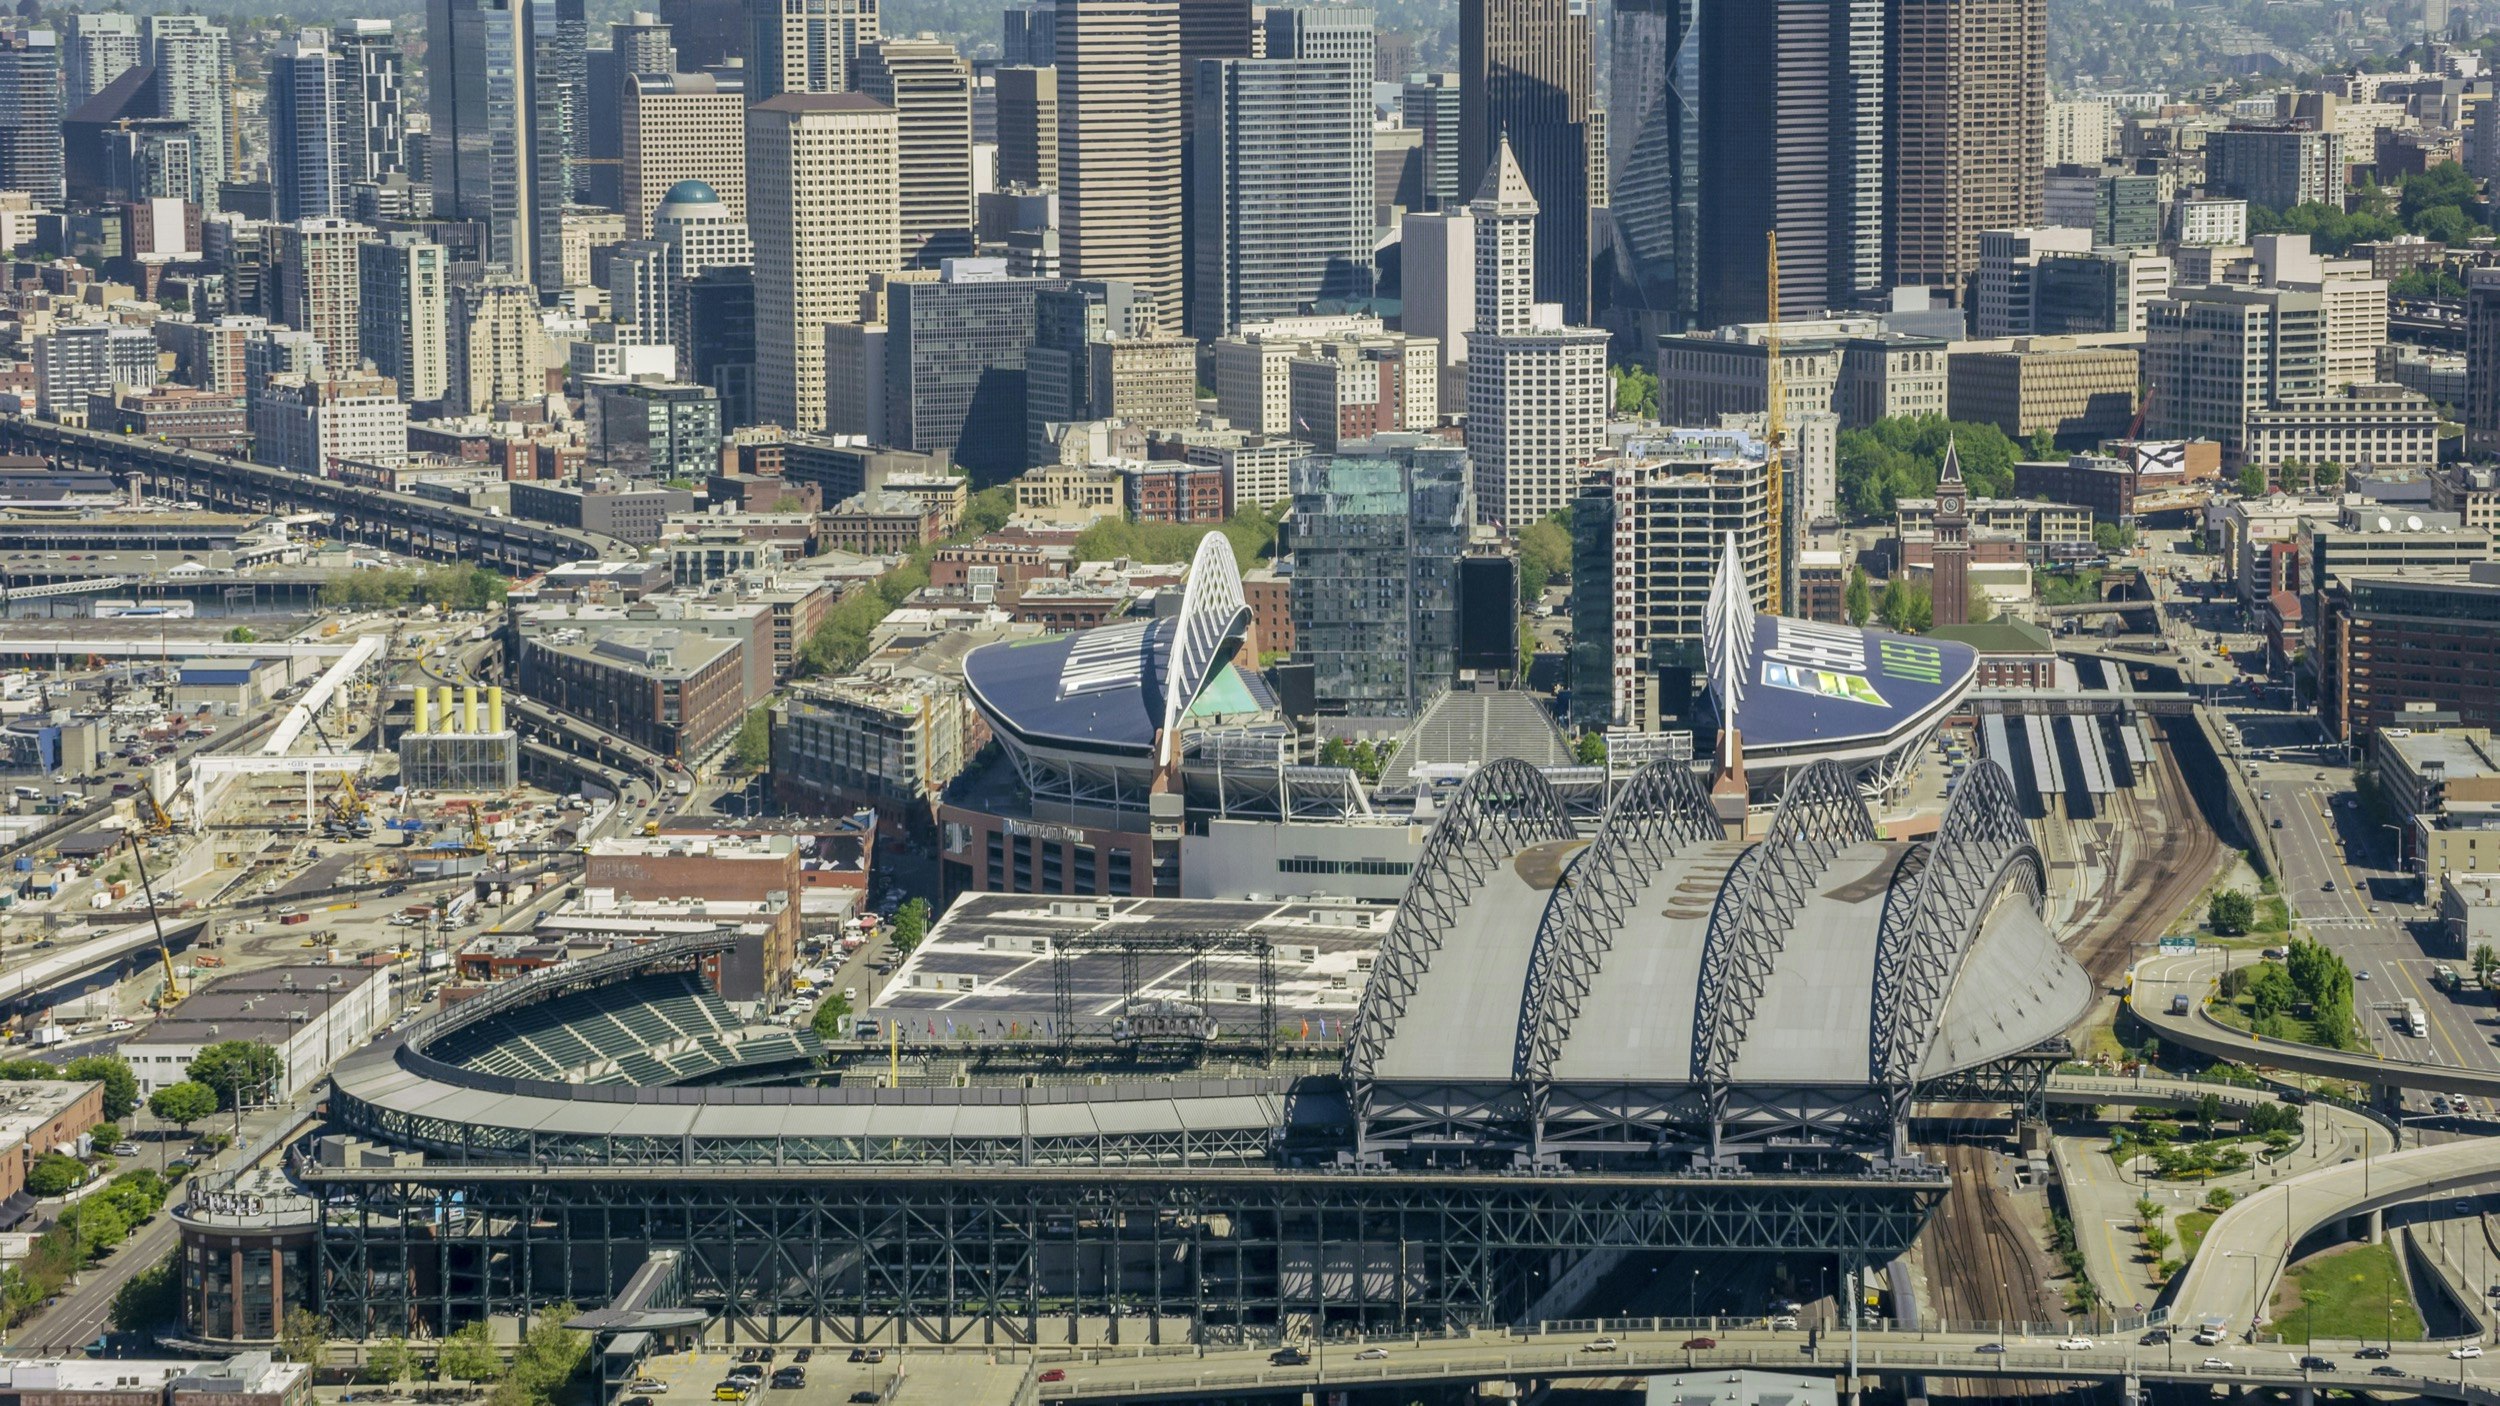 CenturyLink Field and T-Mobile Park are seen in the waterfront area of Seattle; Waterfront activities